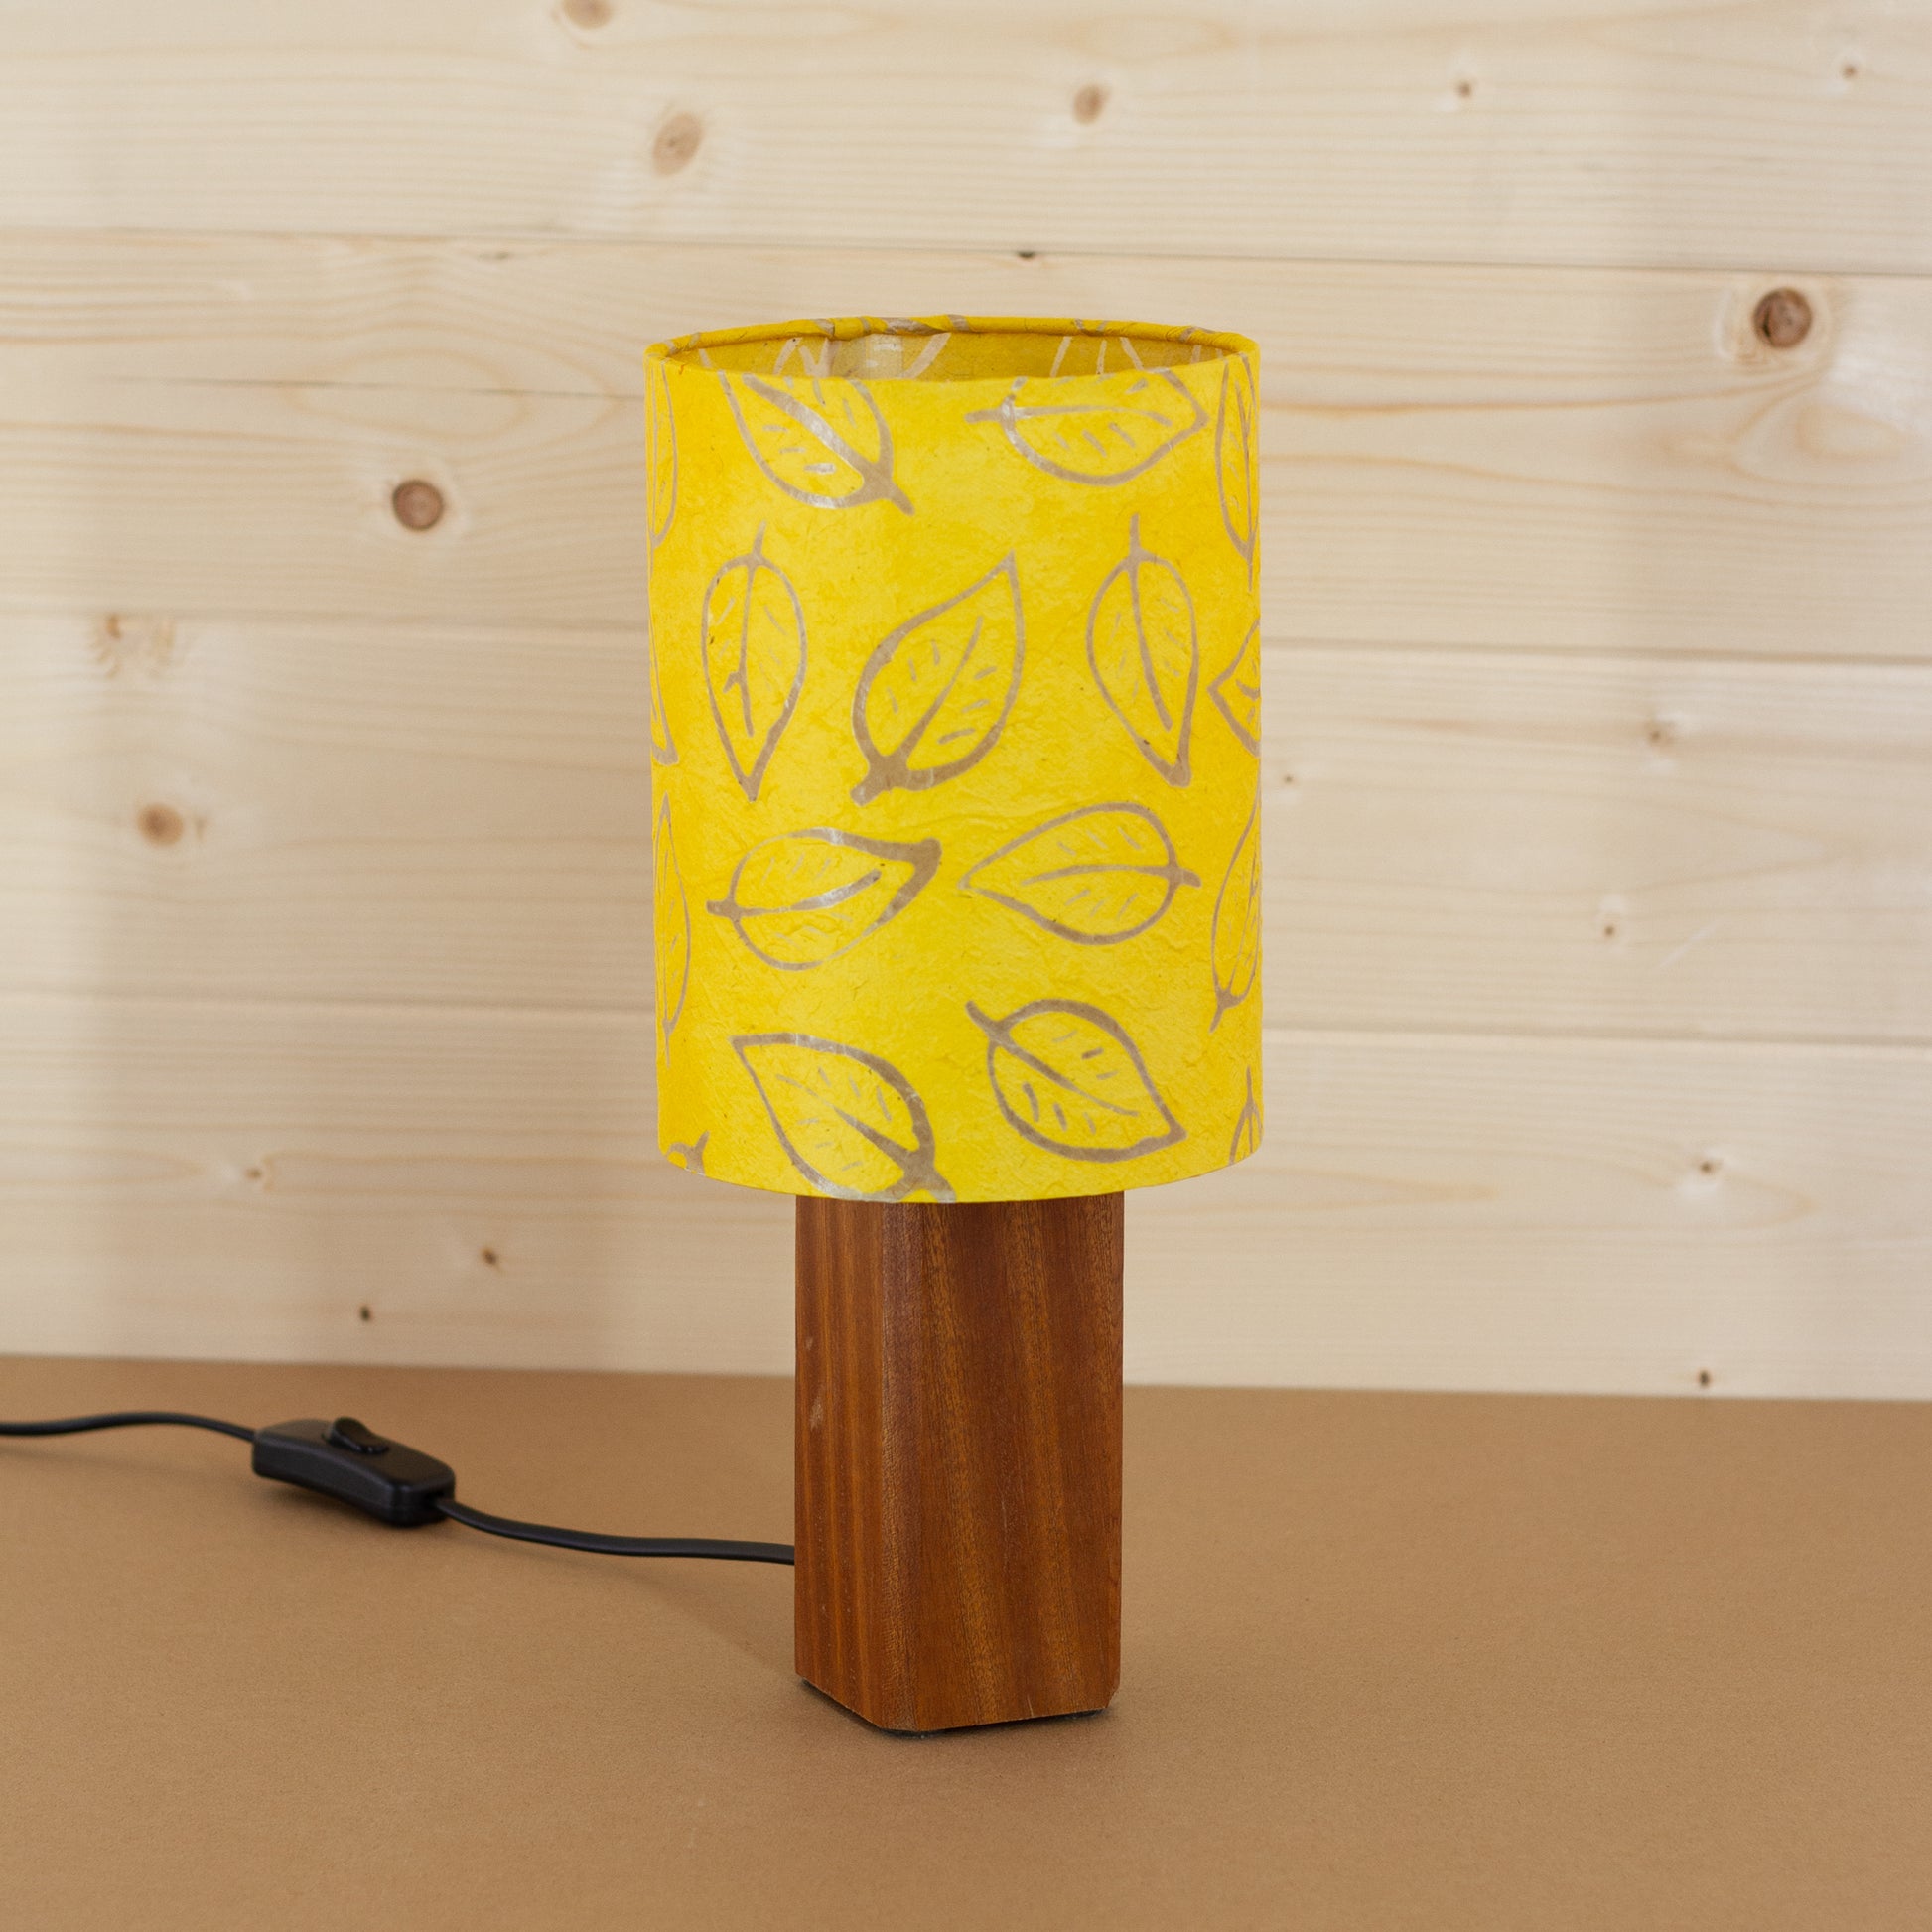 Batik Leaf Yellow on Square Sapele Table Lamp Base, Handmade by Imbue Lighting on the Isle of Anglesey, Wales.